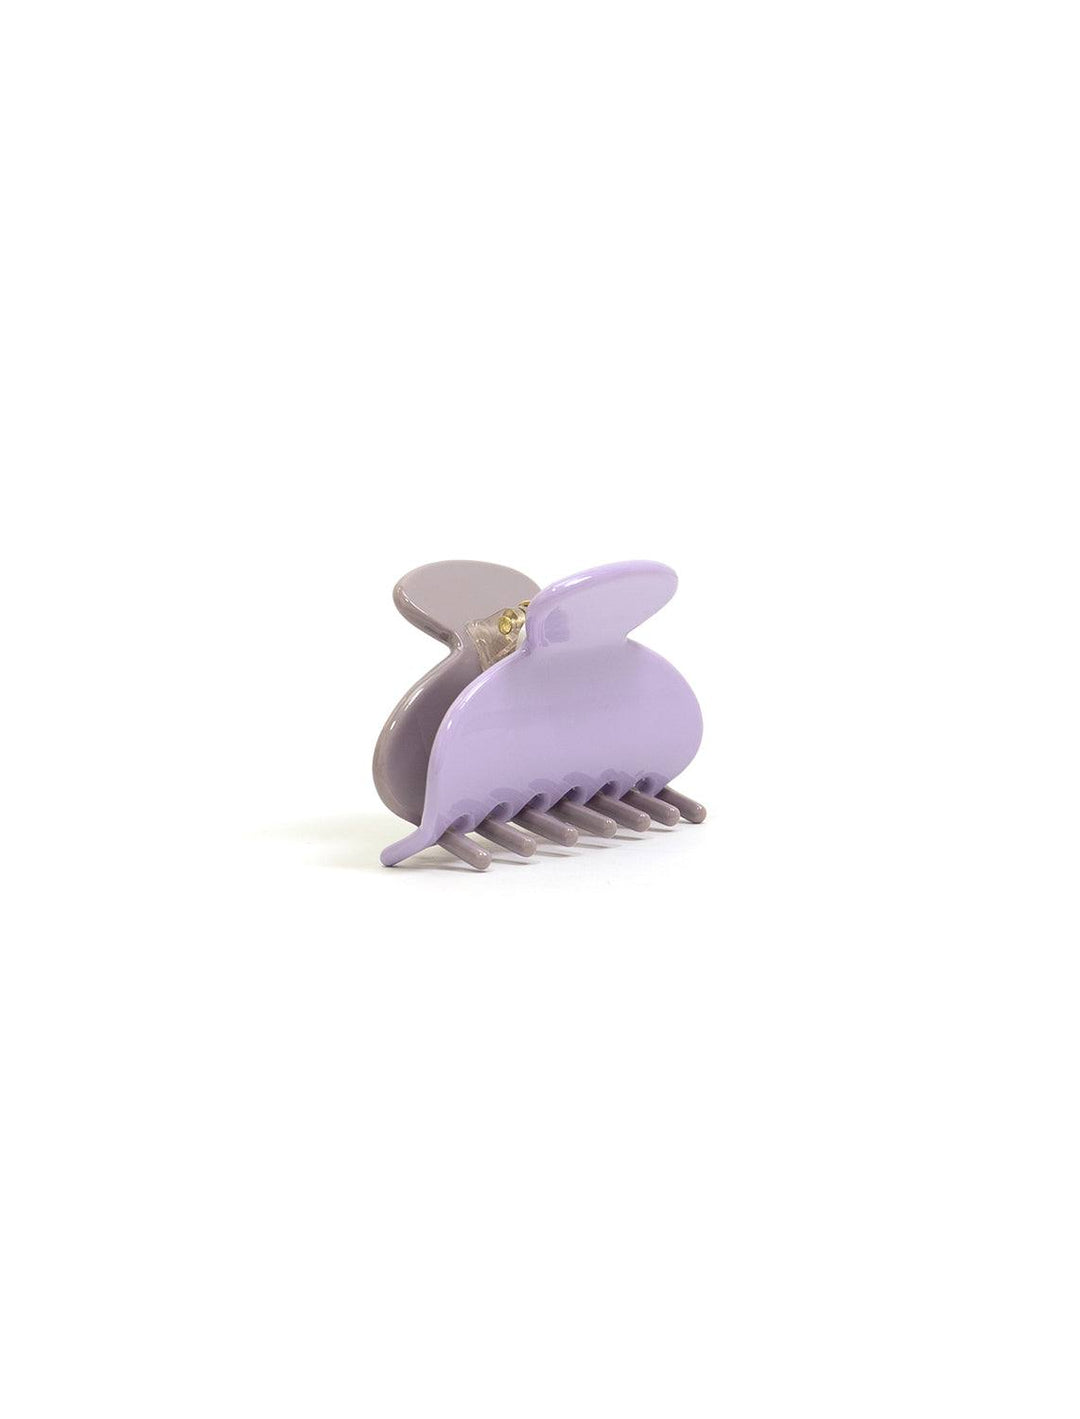 Nat + Noor's Two-Tone Small Hair Claw in Plum.